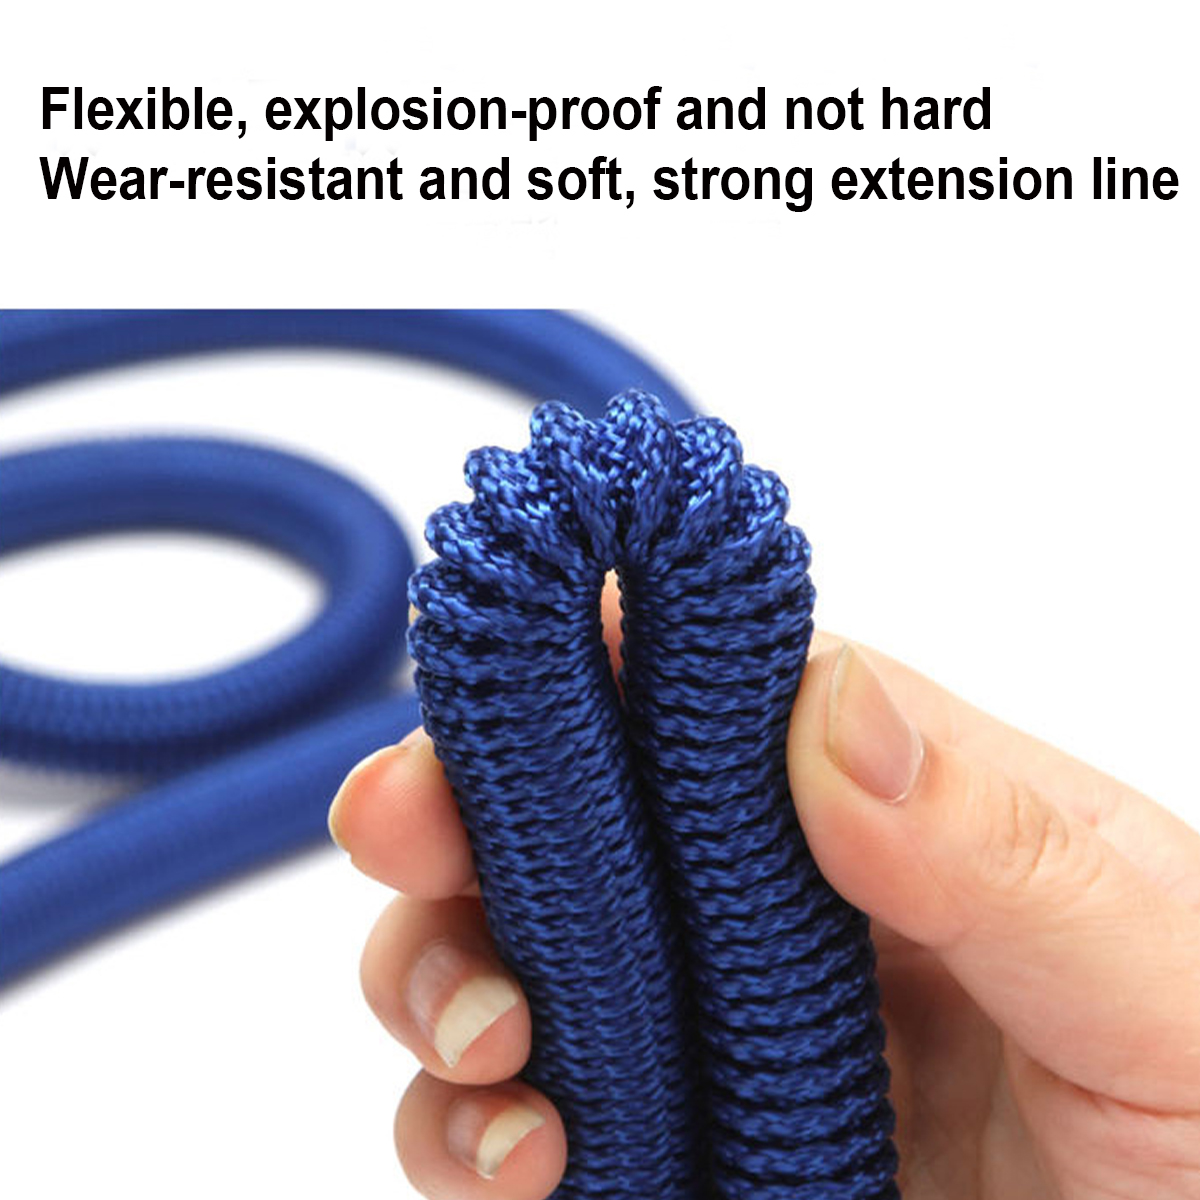 25-100ft-Expandable-Flexible-Garden-Water-Hose-Water-Pipe-Watering-Sprayer-1807508-8